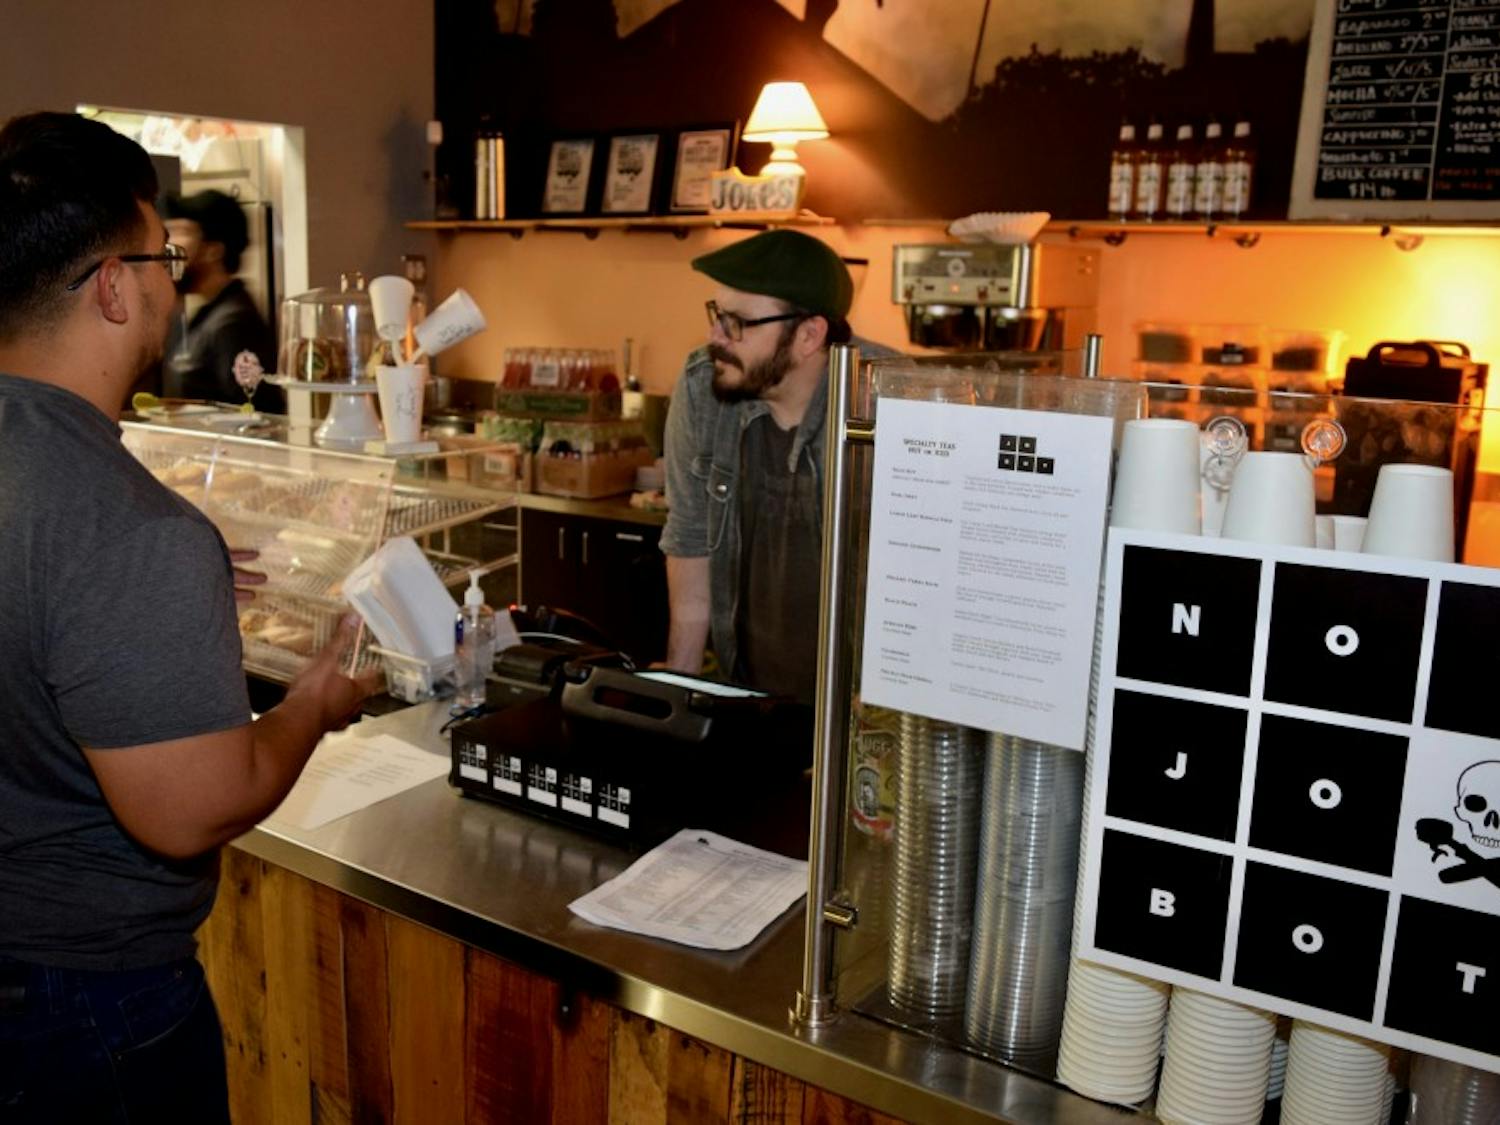 Barista Robert Zunigha takes a coffee order from Javier Gonzalez at Jobot Coffee's new location at Roosevelt Point in Downtown Phoenix, Arizona,&nbsp;on Jan. 23, 2017.